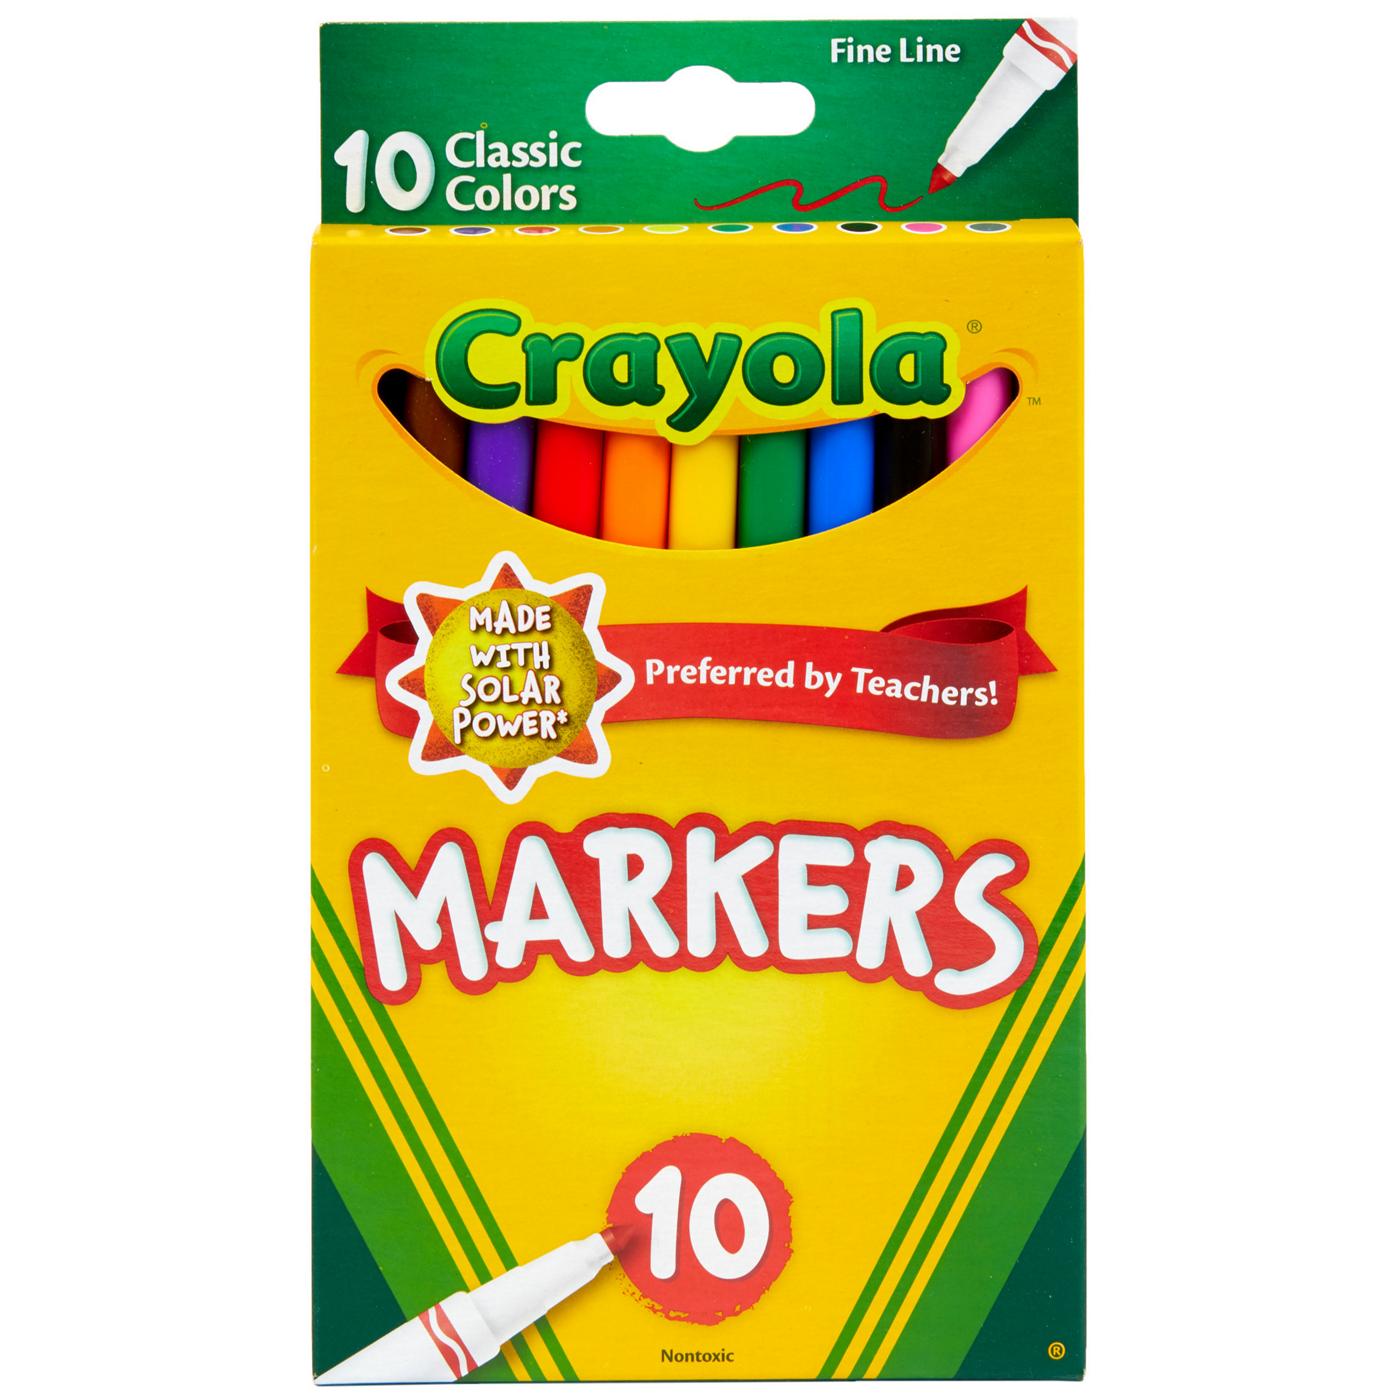 CROXLEY CREATE Fine Liners (Card of 10 Assorted Colours)